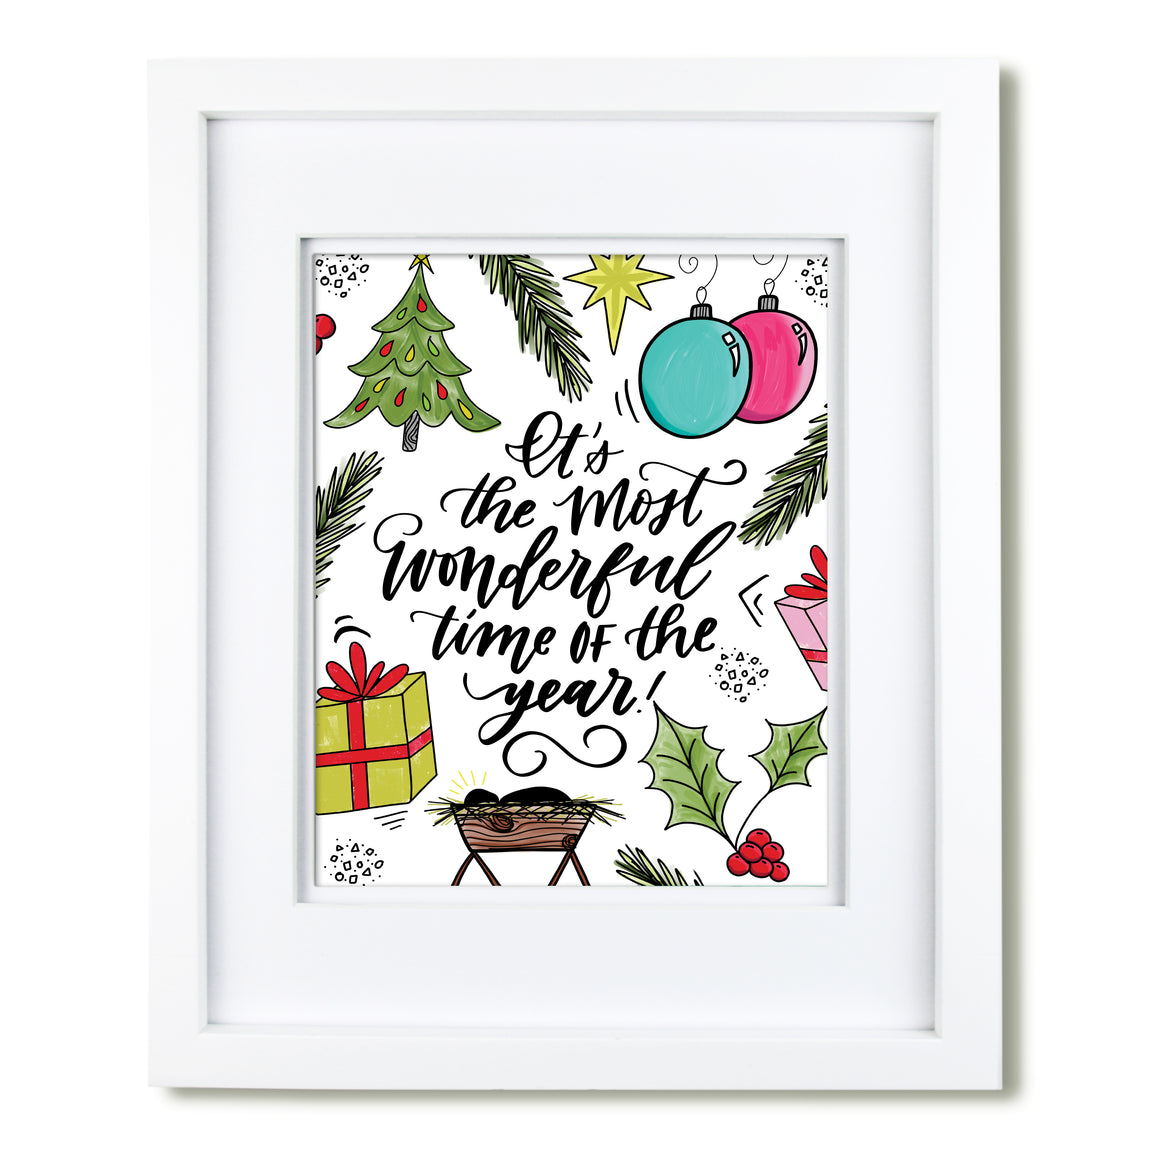 "Most Wonderful Time Of The Year" art print